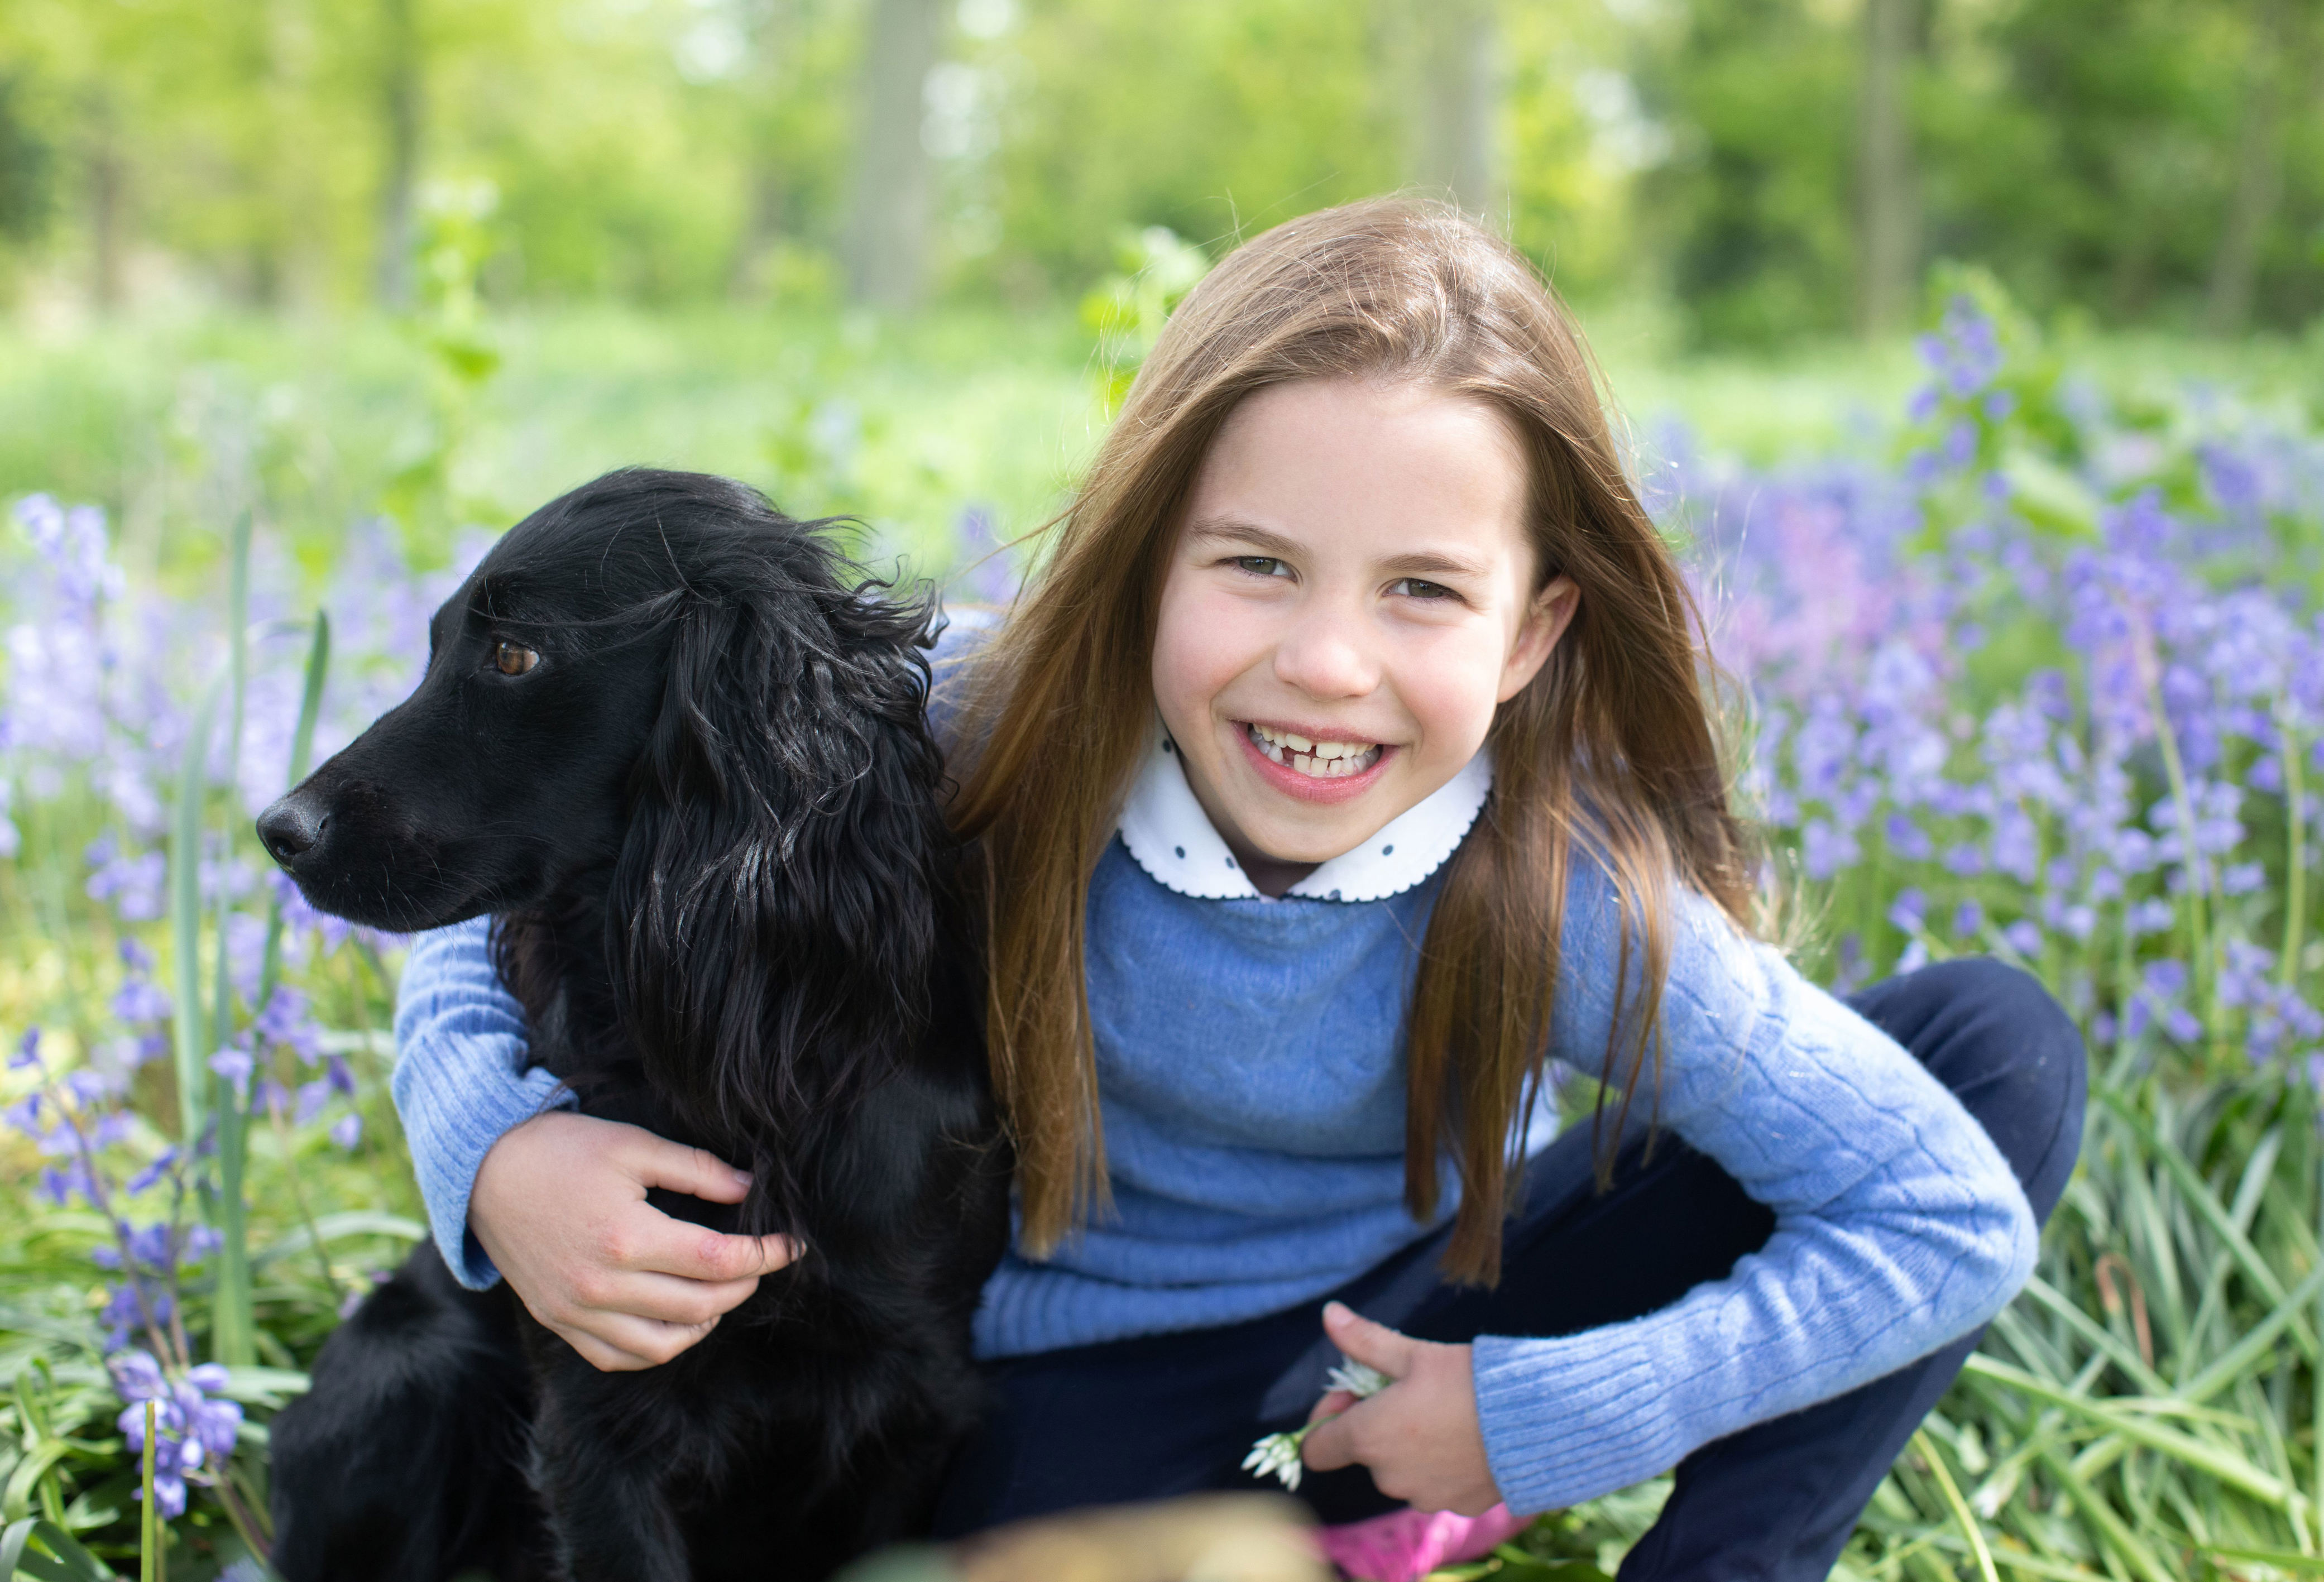 <p>Princess Charlotte posed with her family's pet cocker spaniel in a portrait taken by her mother, <a href="https://www.wonderwall.com/celebrity/profiles/overview/duchess-kate-1356.article">Duchess Kate</a>, in a field of bluebells near their country home, Anmer Hall, in Norfolk, England, the weekend before her 7th birthday on May 2, 2022.</p>